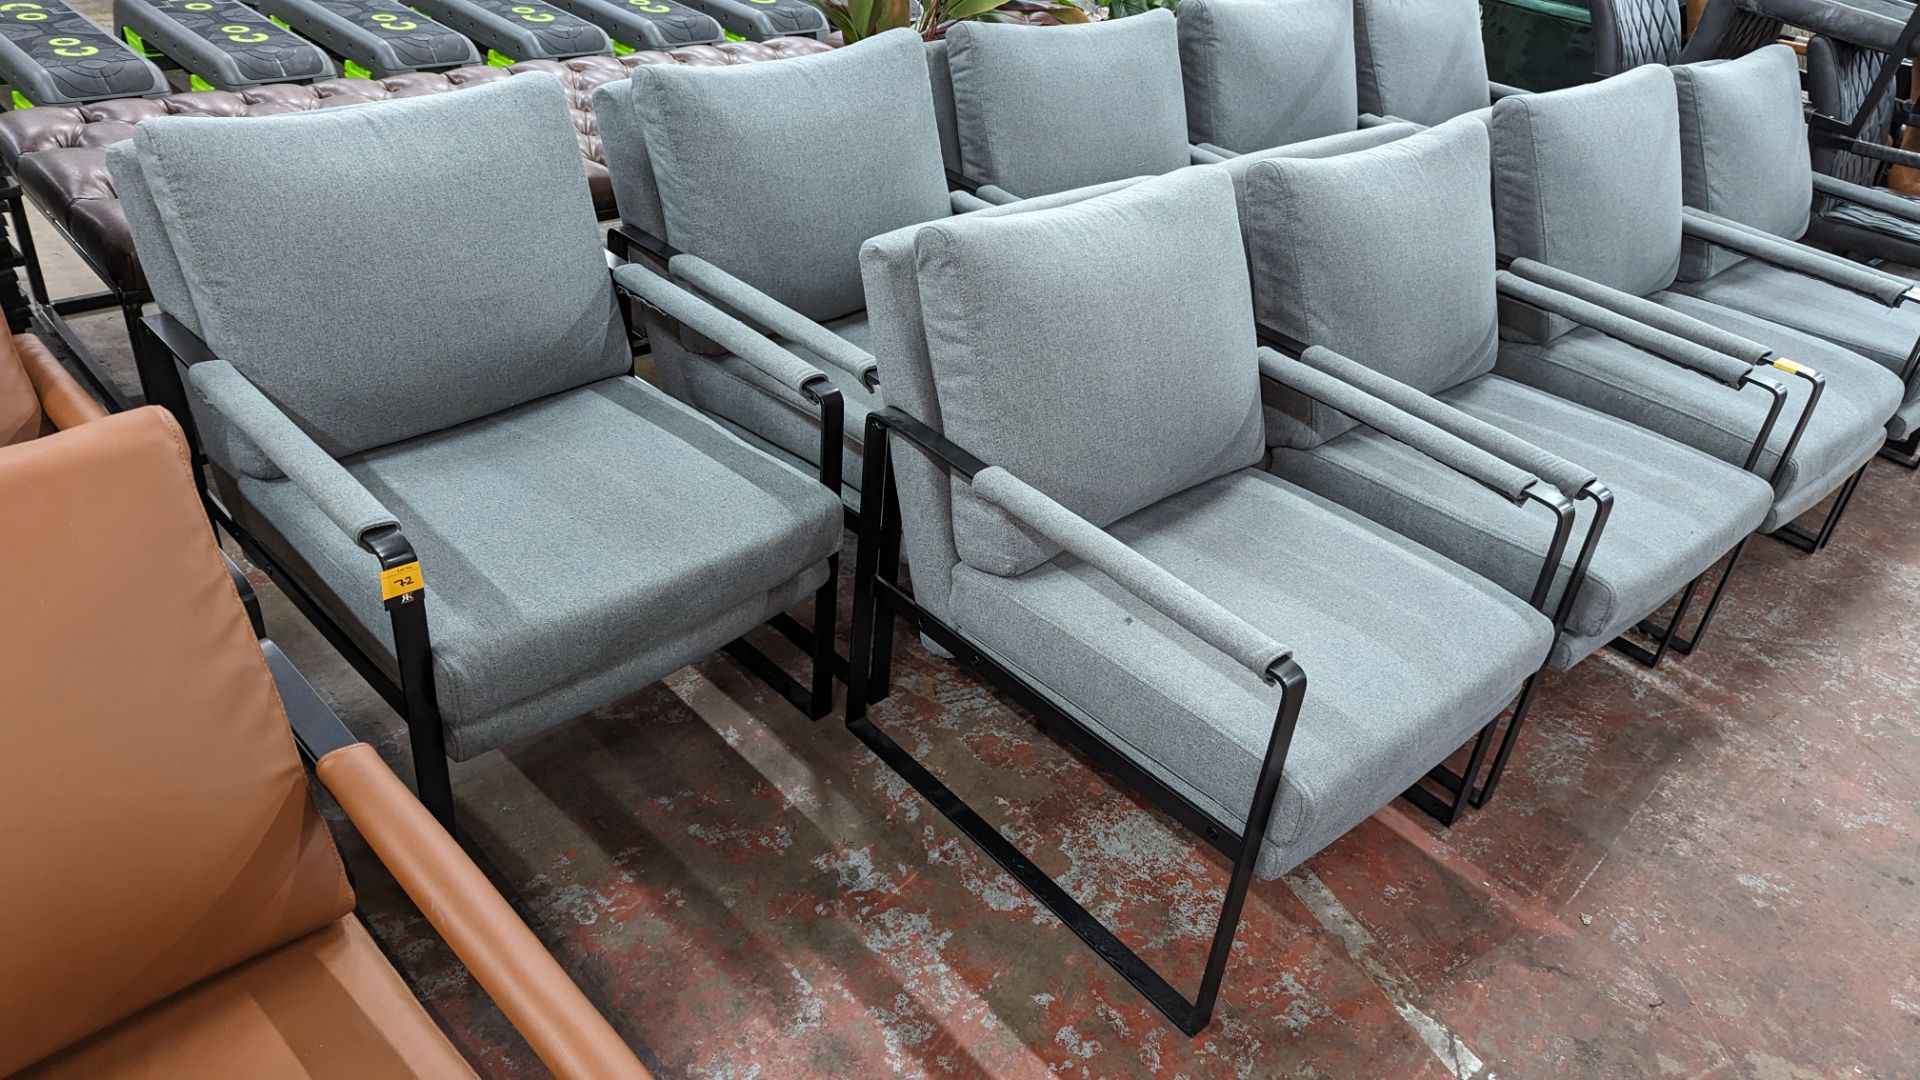 5 off matching chairs on heavy duty black metal frames. NB: The chairs forming lots 71 to 73 all u